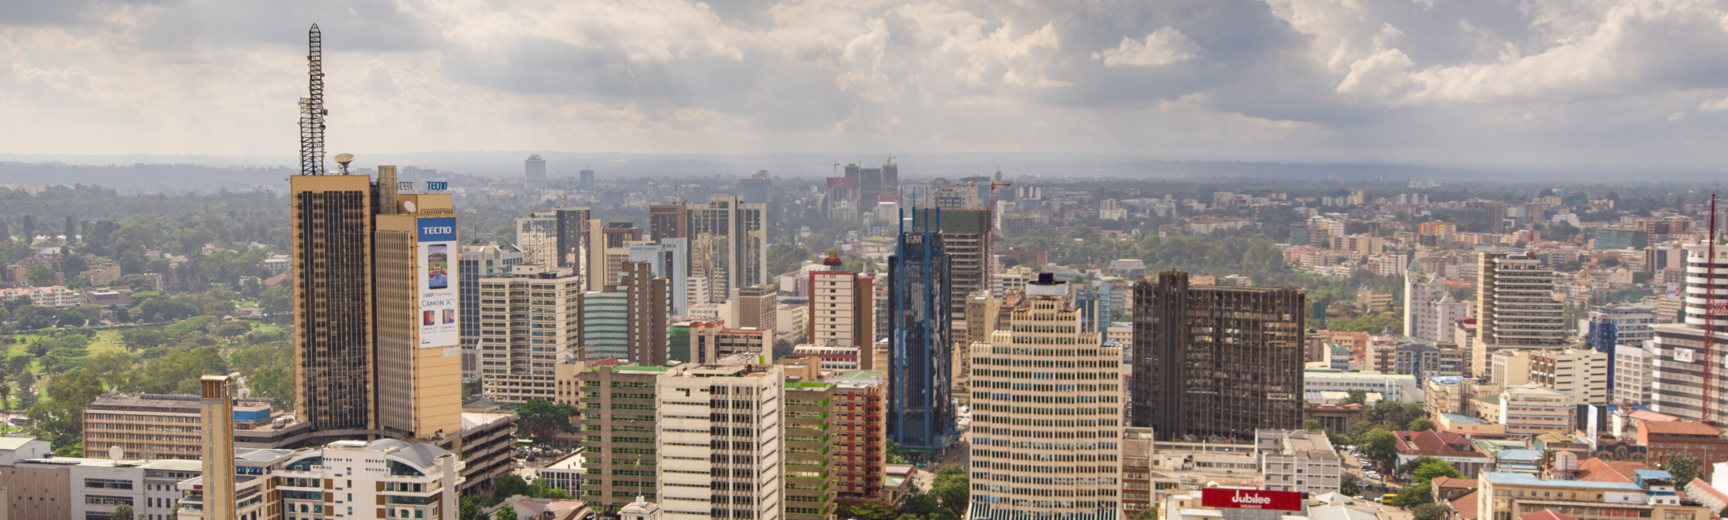 Aerial view of Nairobi's Business District